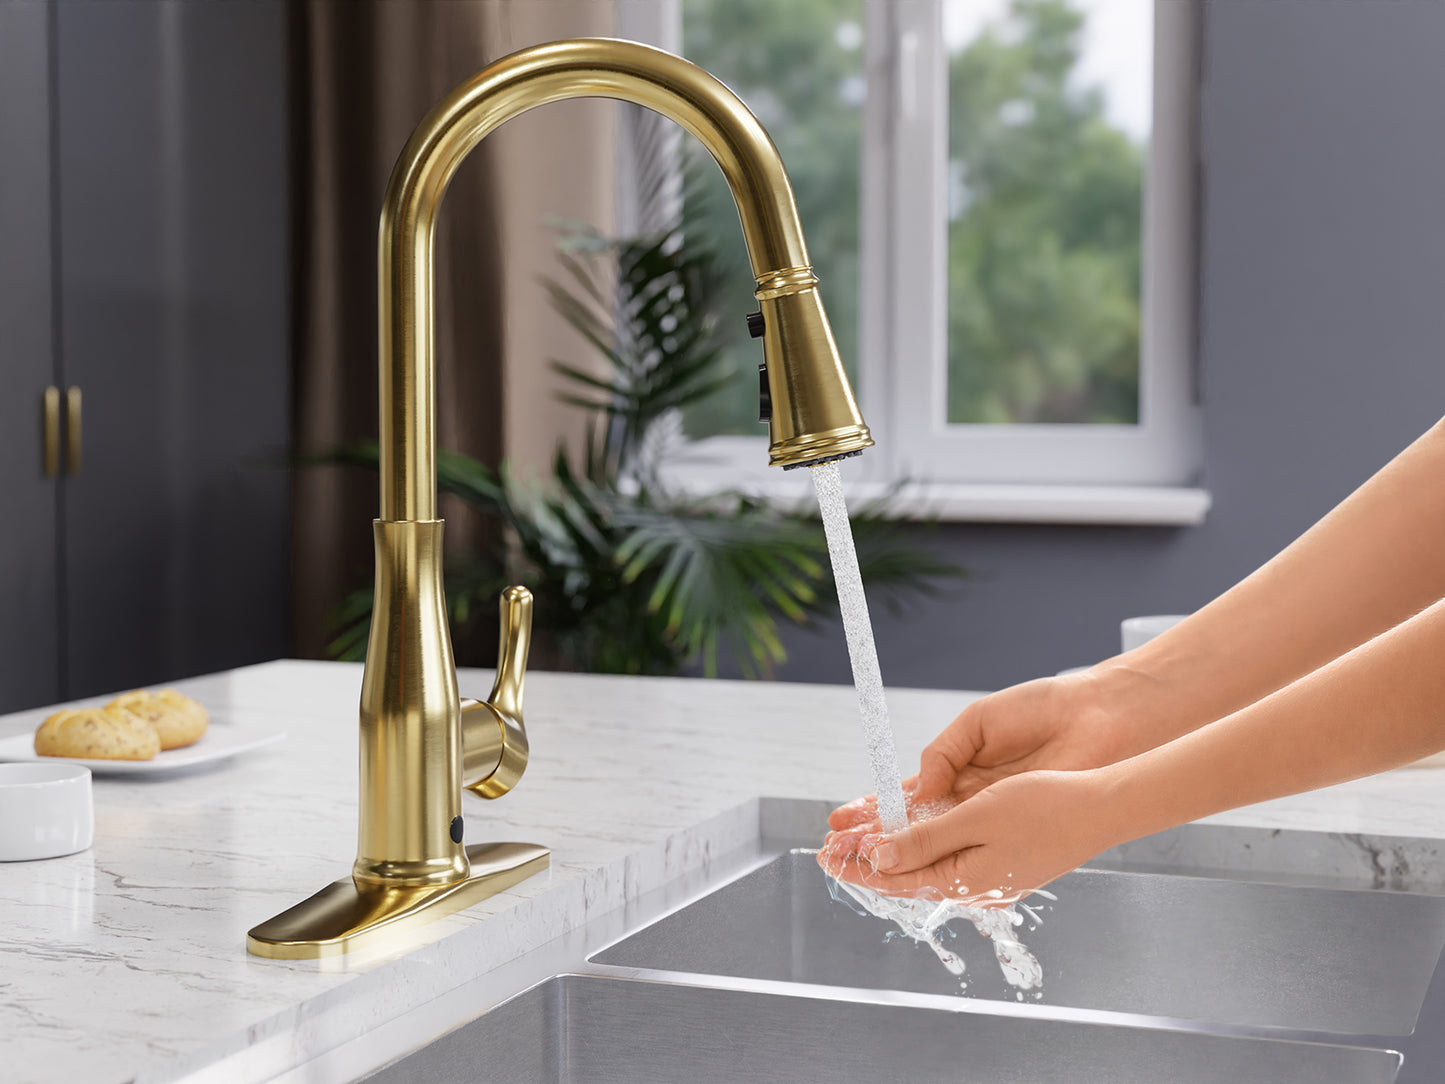 KF-AZ301BG - Sifo Hands Free Touchless 1-Handle Pull-Down Sprayer Kitchen Faucet with Motion Sense and Fan Sprayer in Brushed Gold